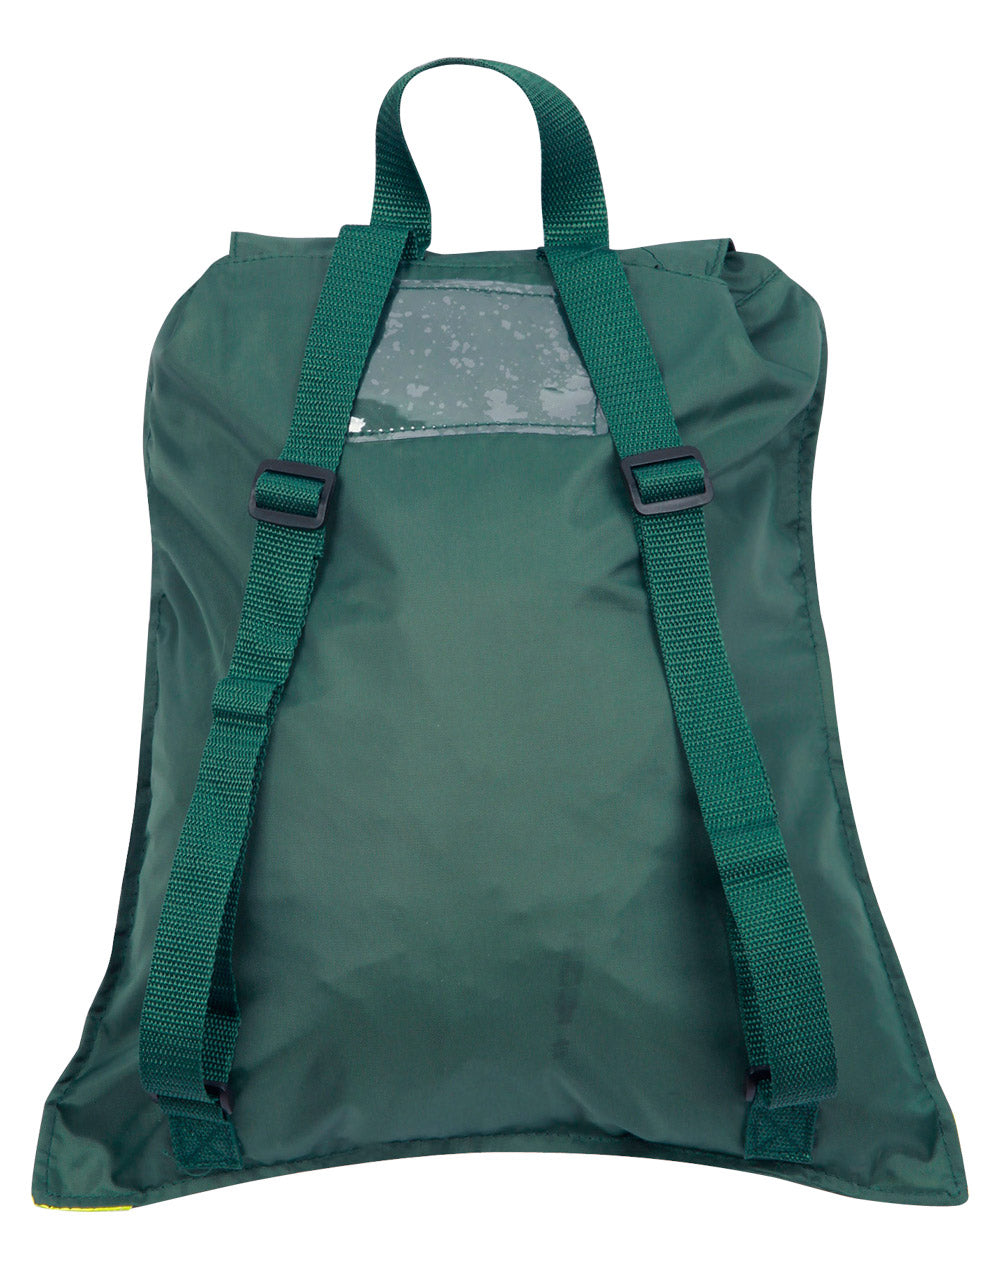 B4489 EXCURSION BACKPACK